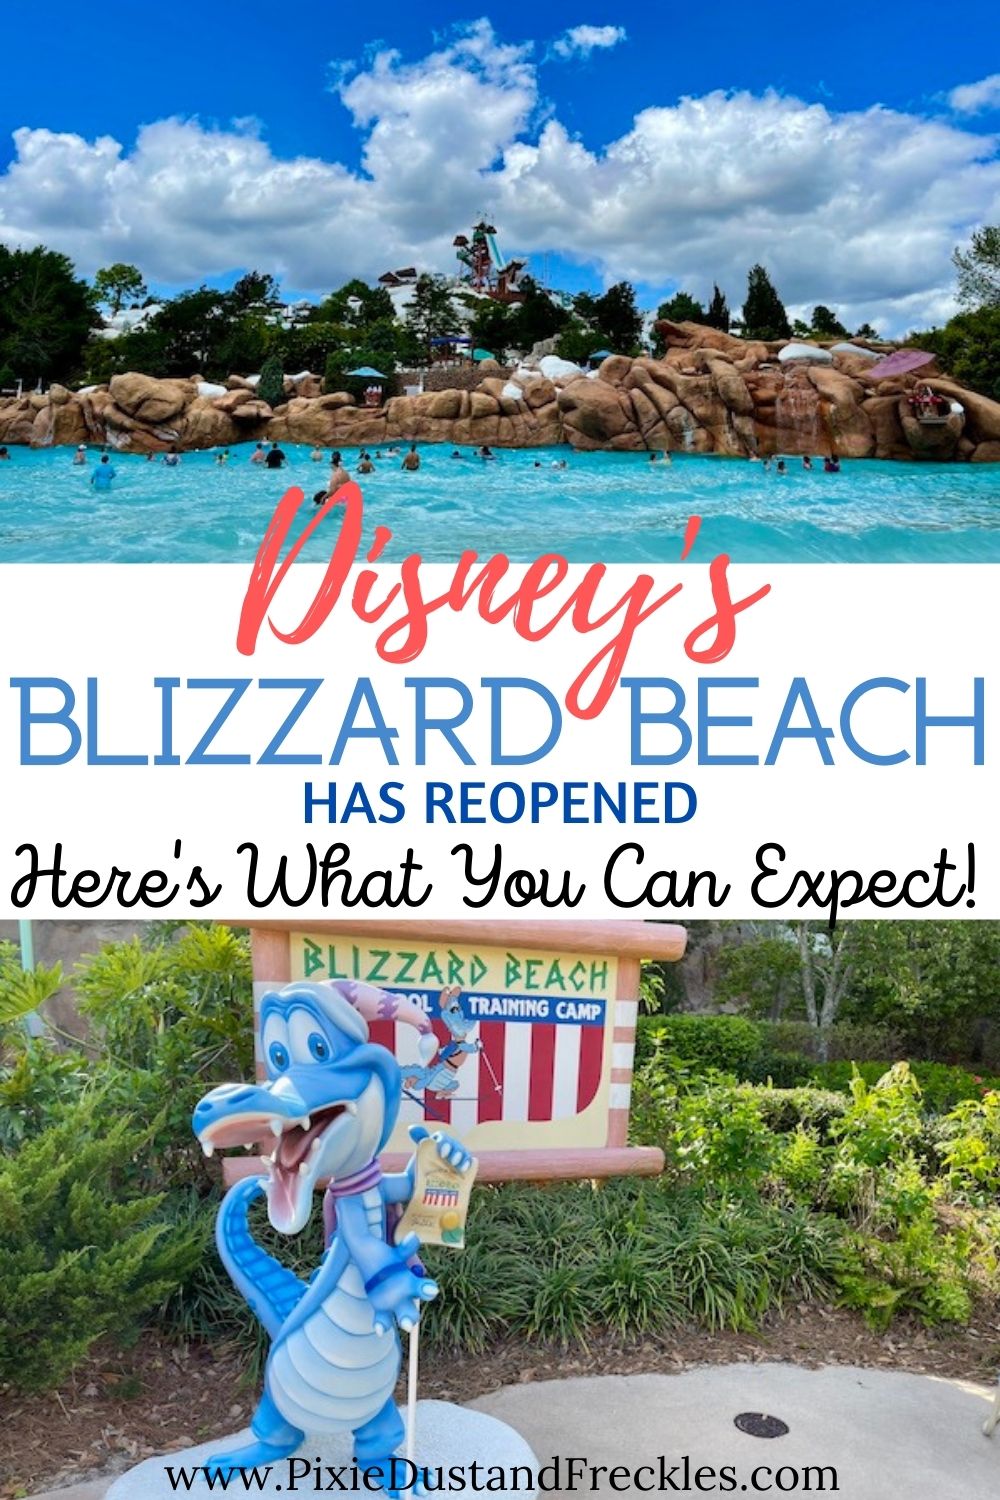 REVIEW: We Had a WHOLE BUCKET of Ice Cream at Disney's Blizzard Beach